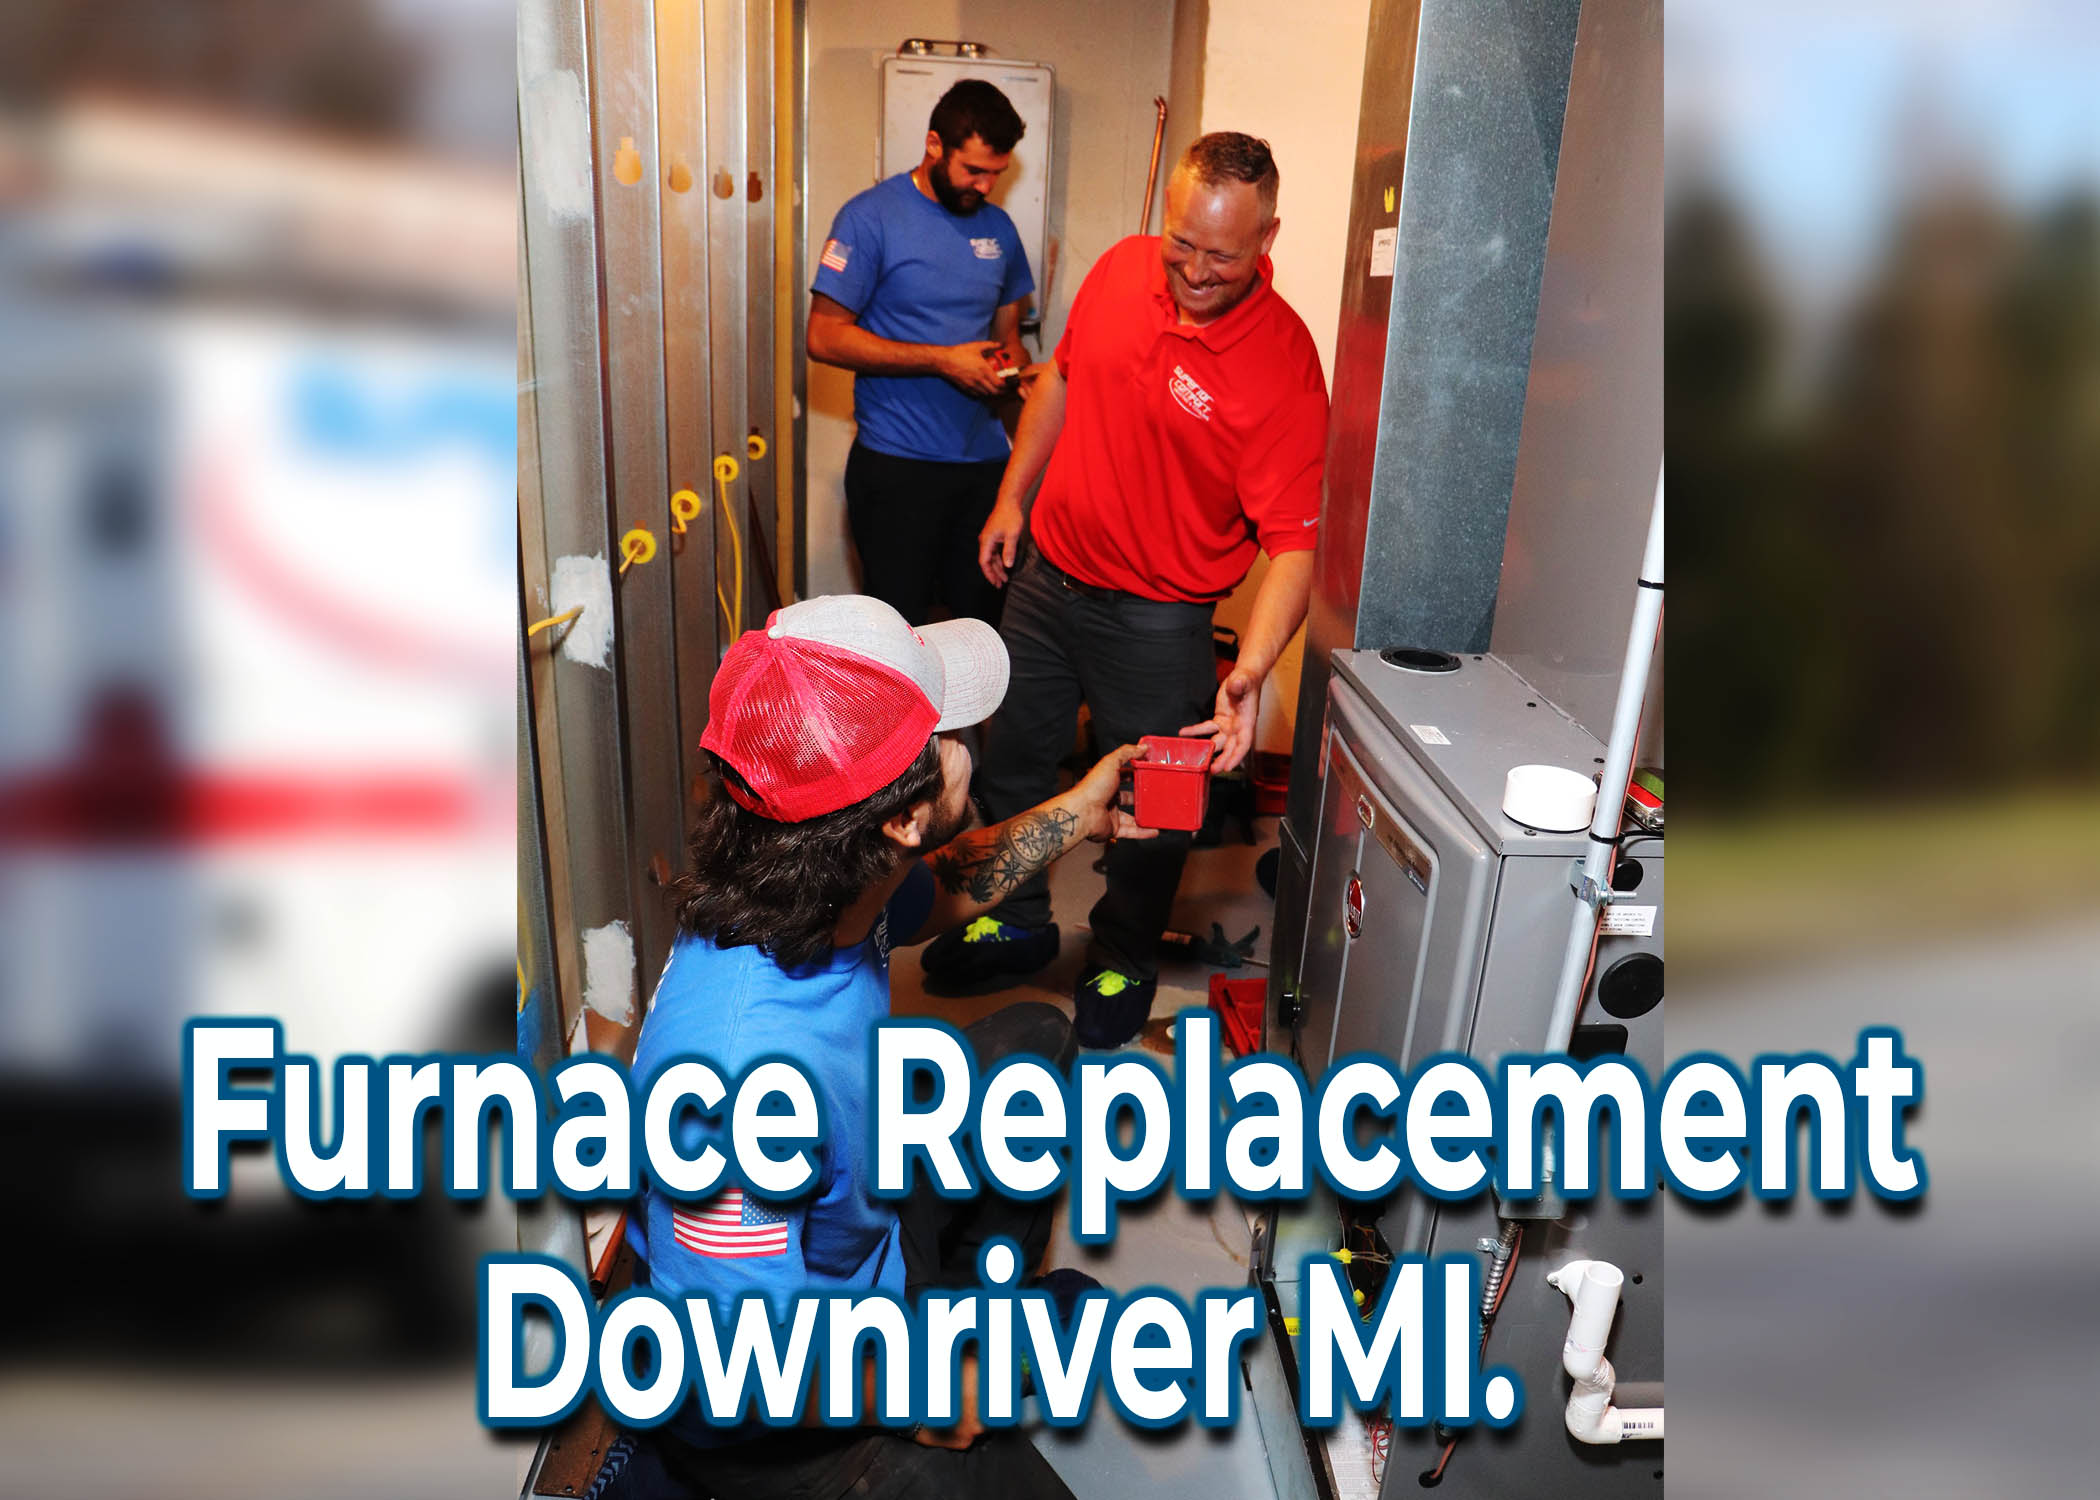 Is Furnace Replacement Downriver MI. Cost Effective